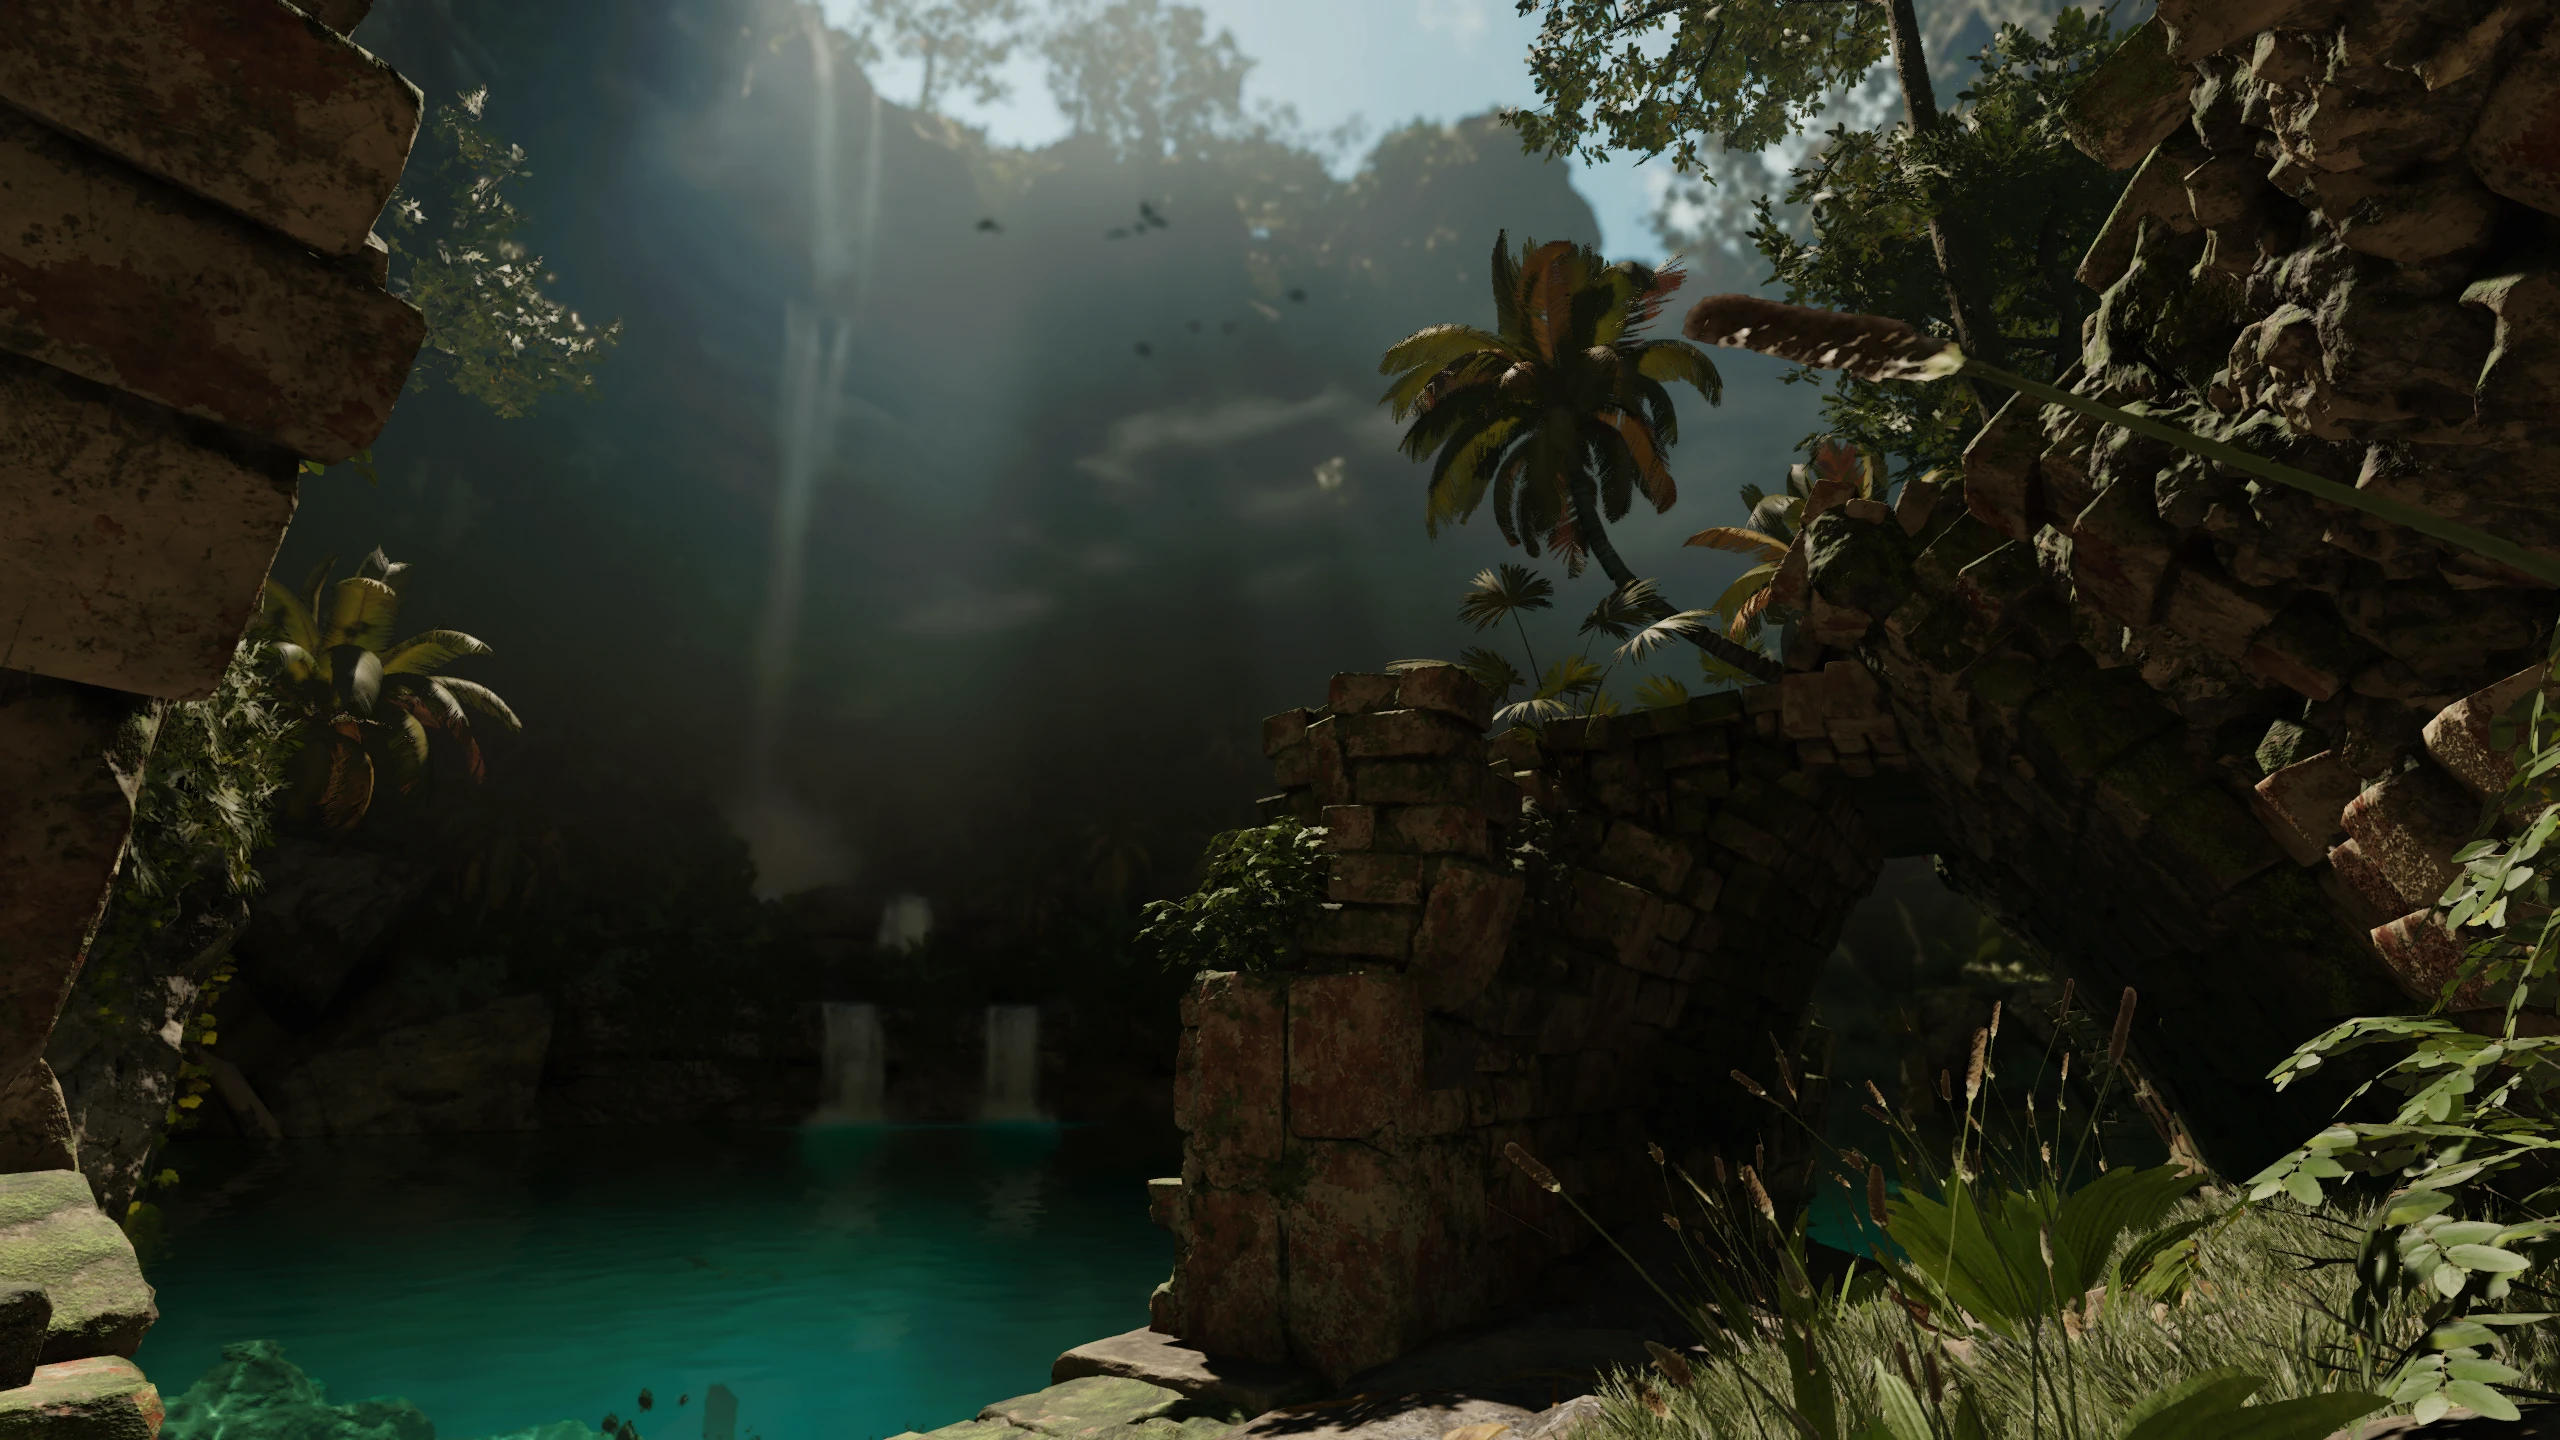 Sottr 10 30 19 Images At Shadow Of The Tomb Raider Nexus Mods Images, Photos, Reviews